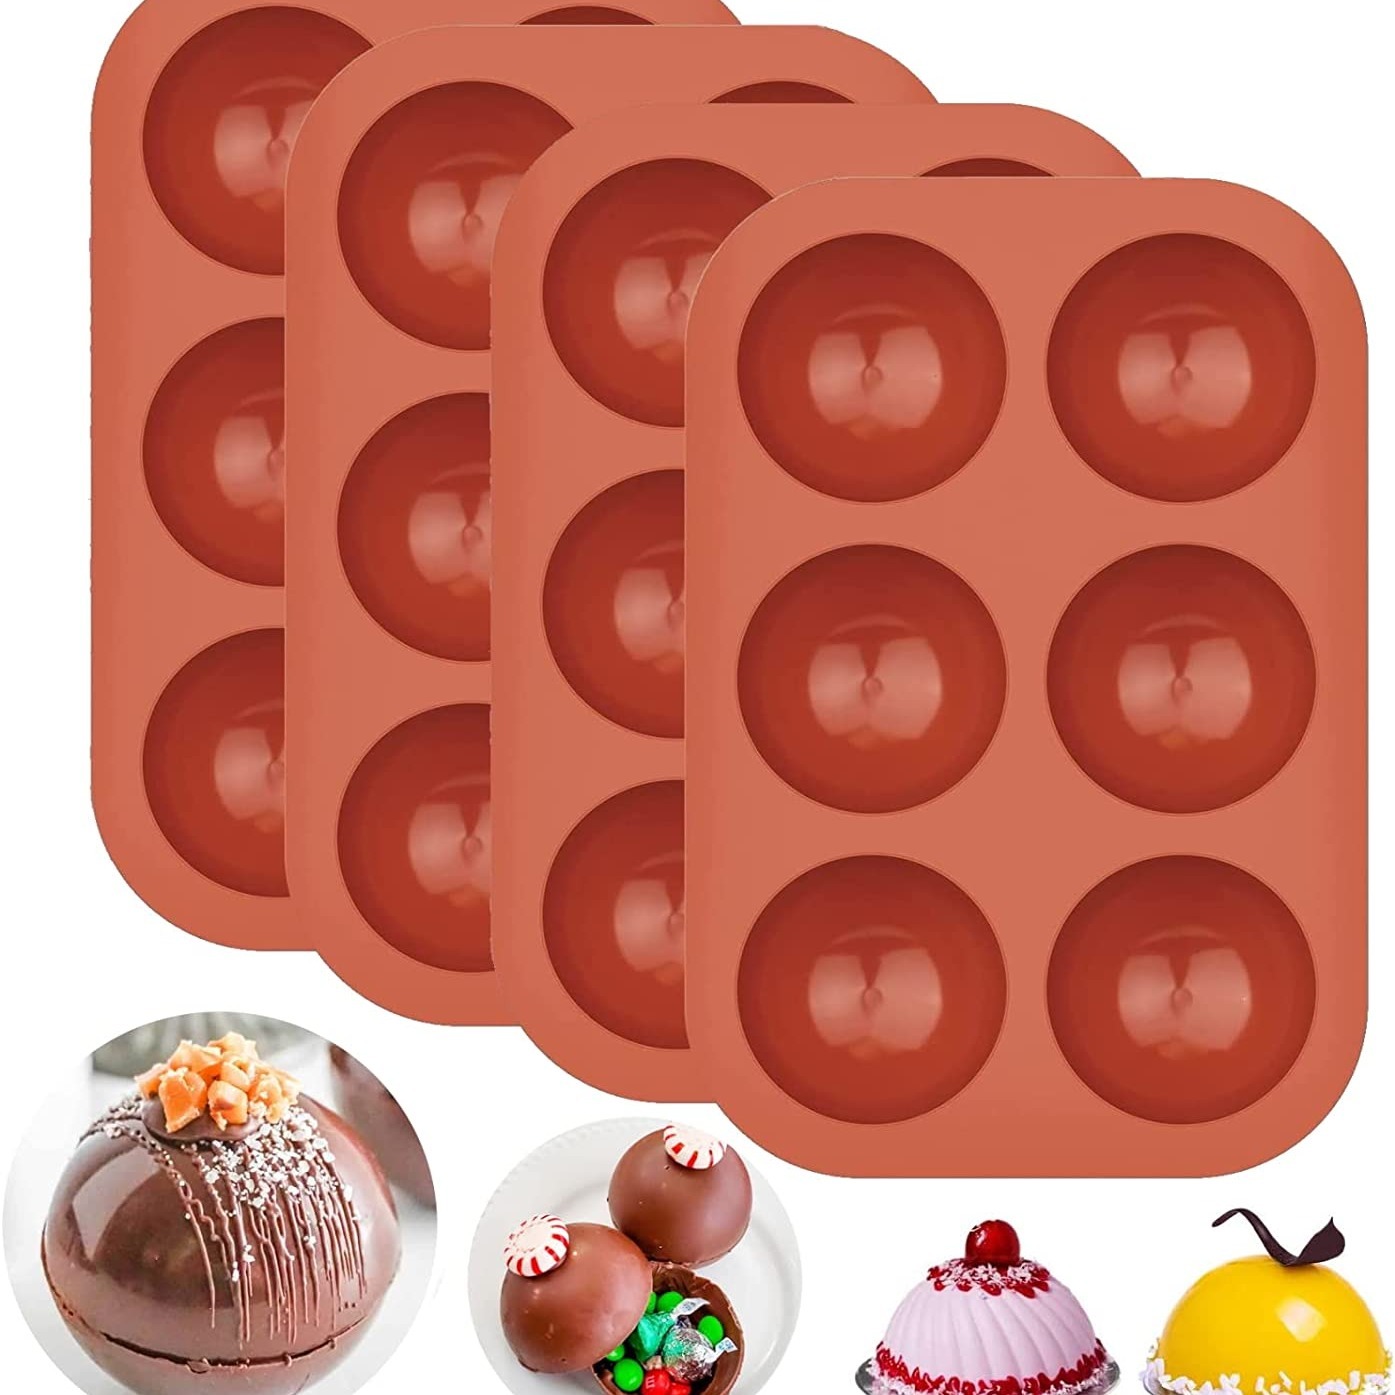 Frcolor Bestomz 6-Cavity Half Circle Silicone Mold for DIY Chocolate Desserts Ice Cream Bombes Cakes Soap Resin Items Making, Adult Unisex, Size: 29x17x3CM